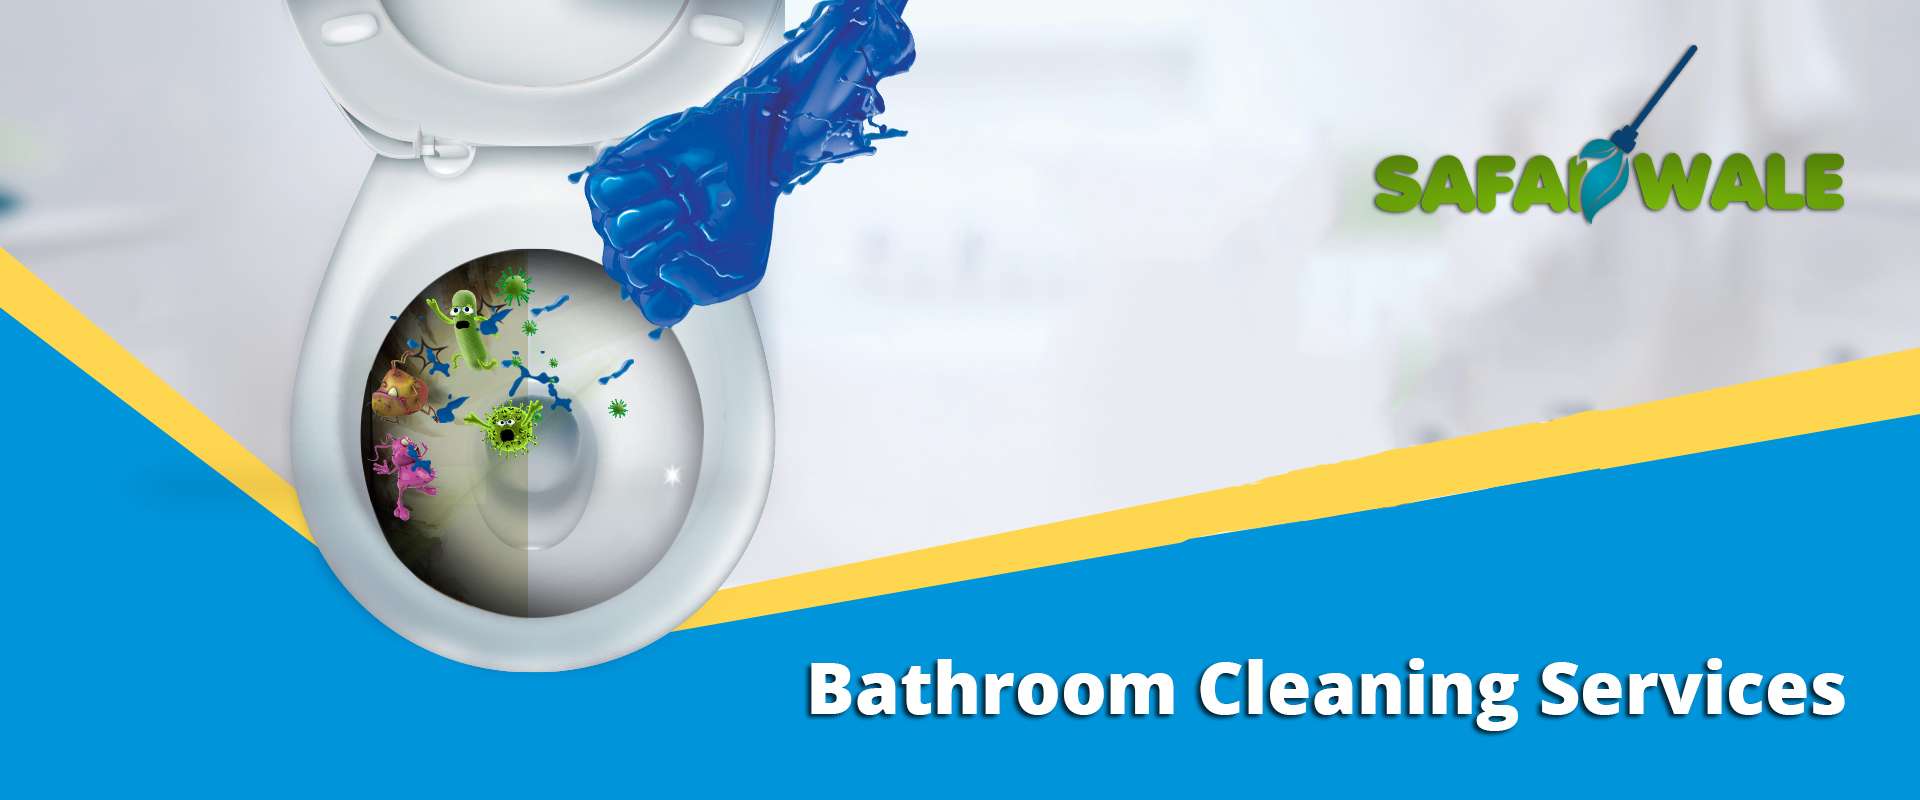 bathroom cleaning services in udaipur